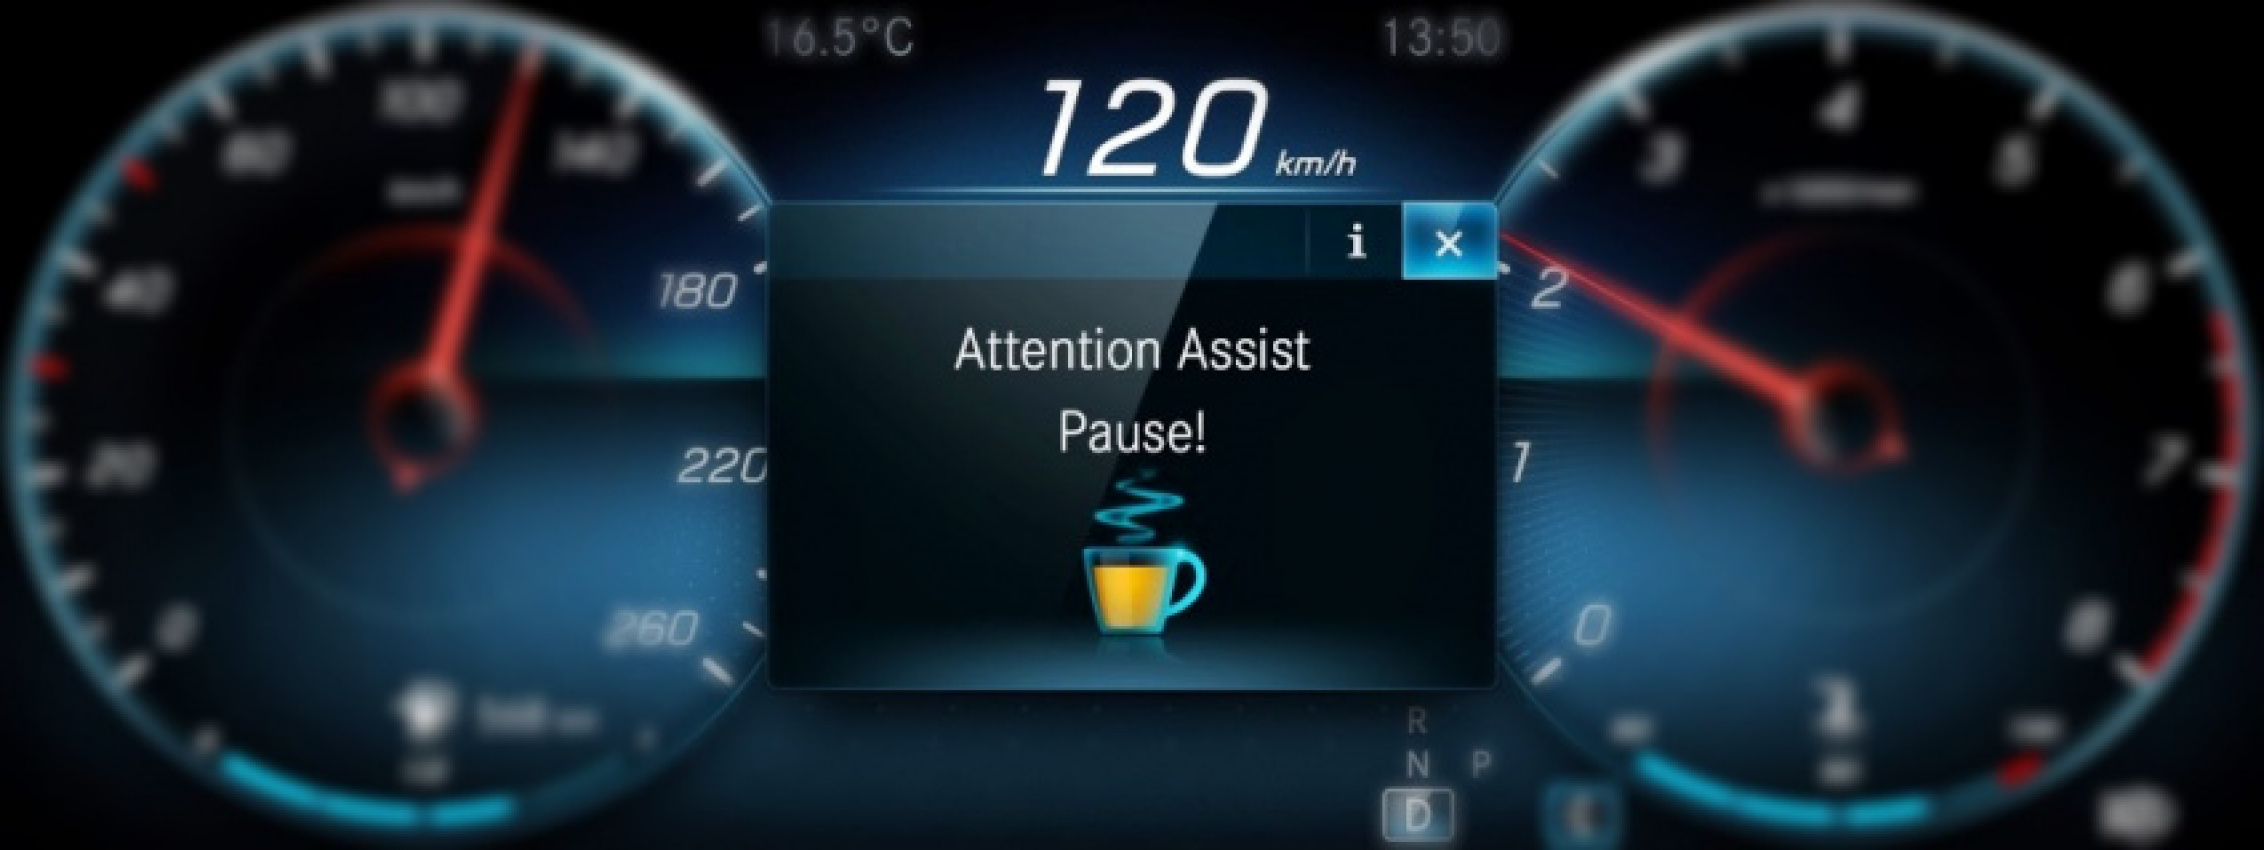 autos, cars, mercedes-benz, attention assist, driving safety, energizing coach, garmin connect mobile, mercedes, mercedes me app, mercedes-benz cla, mercedes-benz gle, mercedes-benz vívoactive 3, motoring safety, smartwatch, android, mercedes-benz vívoactive 3 can help to make driving healthier